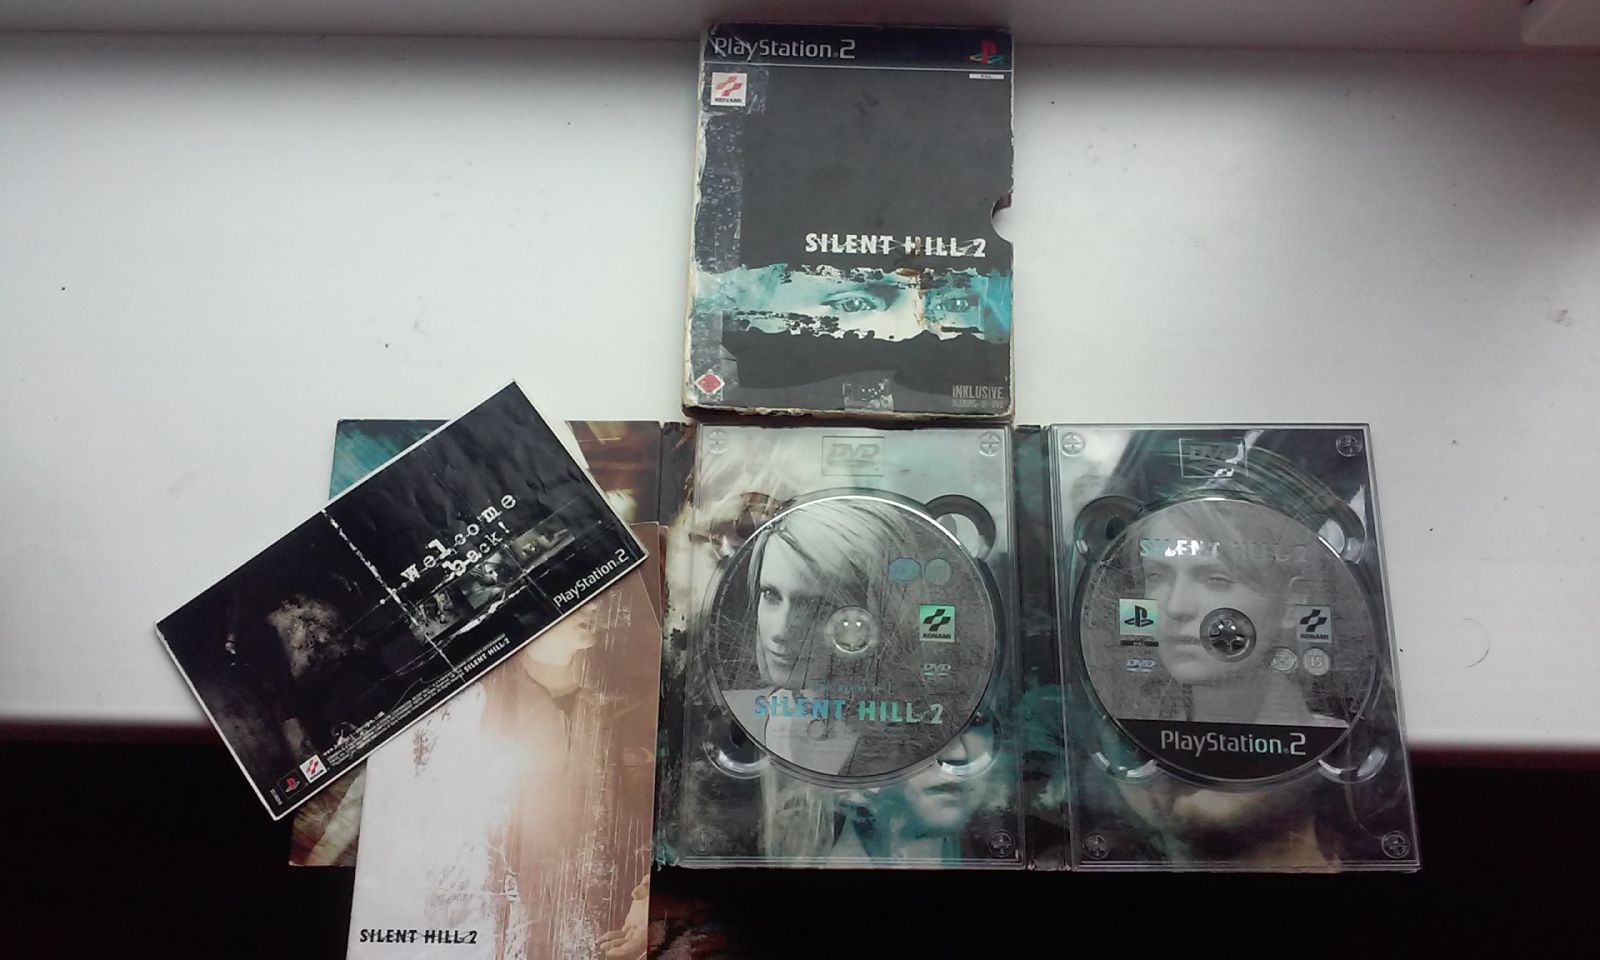 Silent Hill 2 for PS2